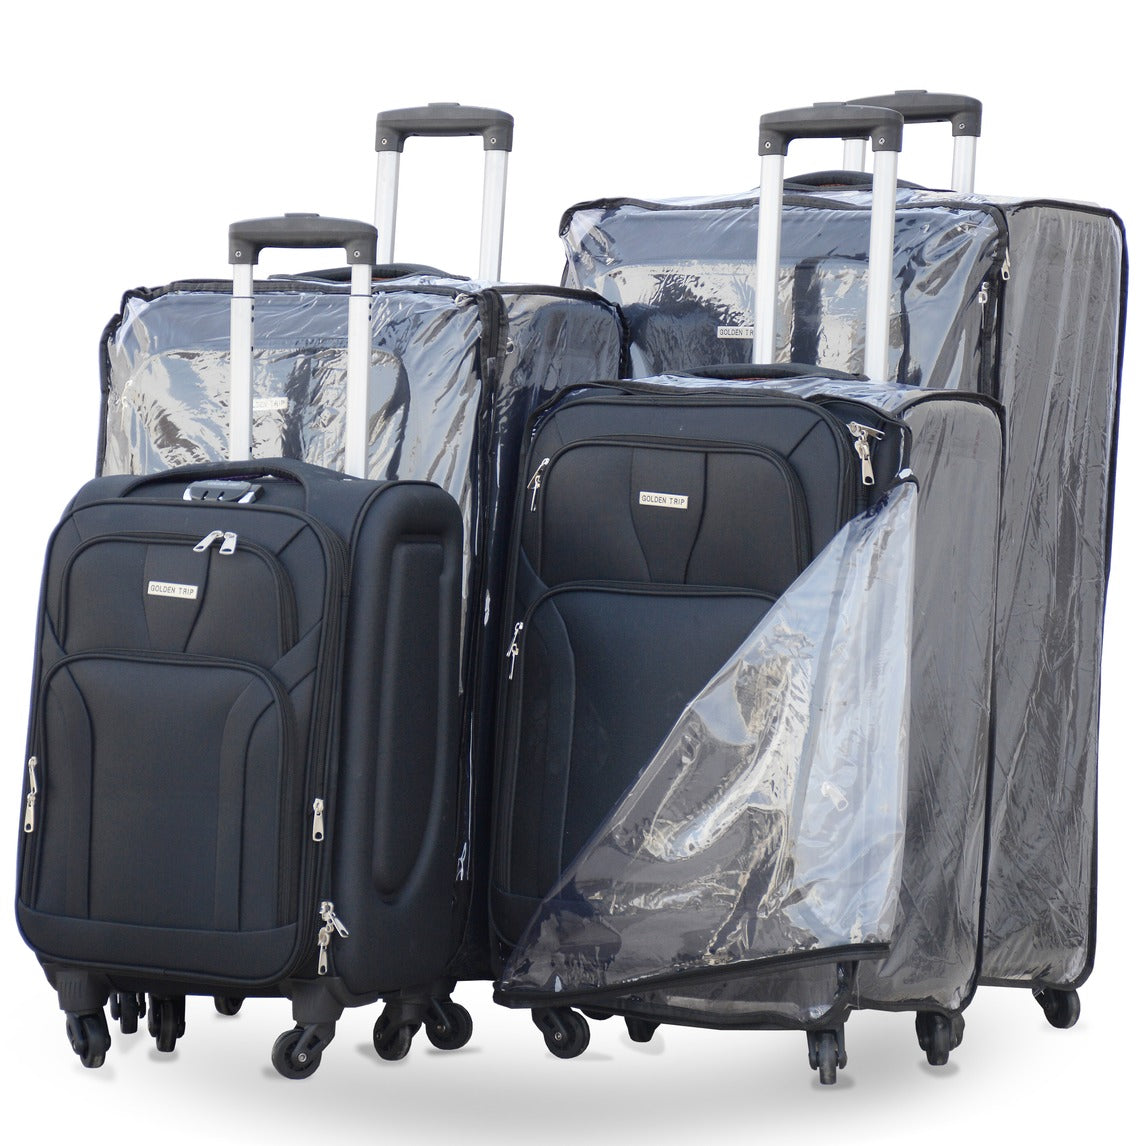 4 Piece Full Set Soft Material 4 Wheel Premium Luggage Bag with Full Cover C1 Zaappy